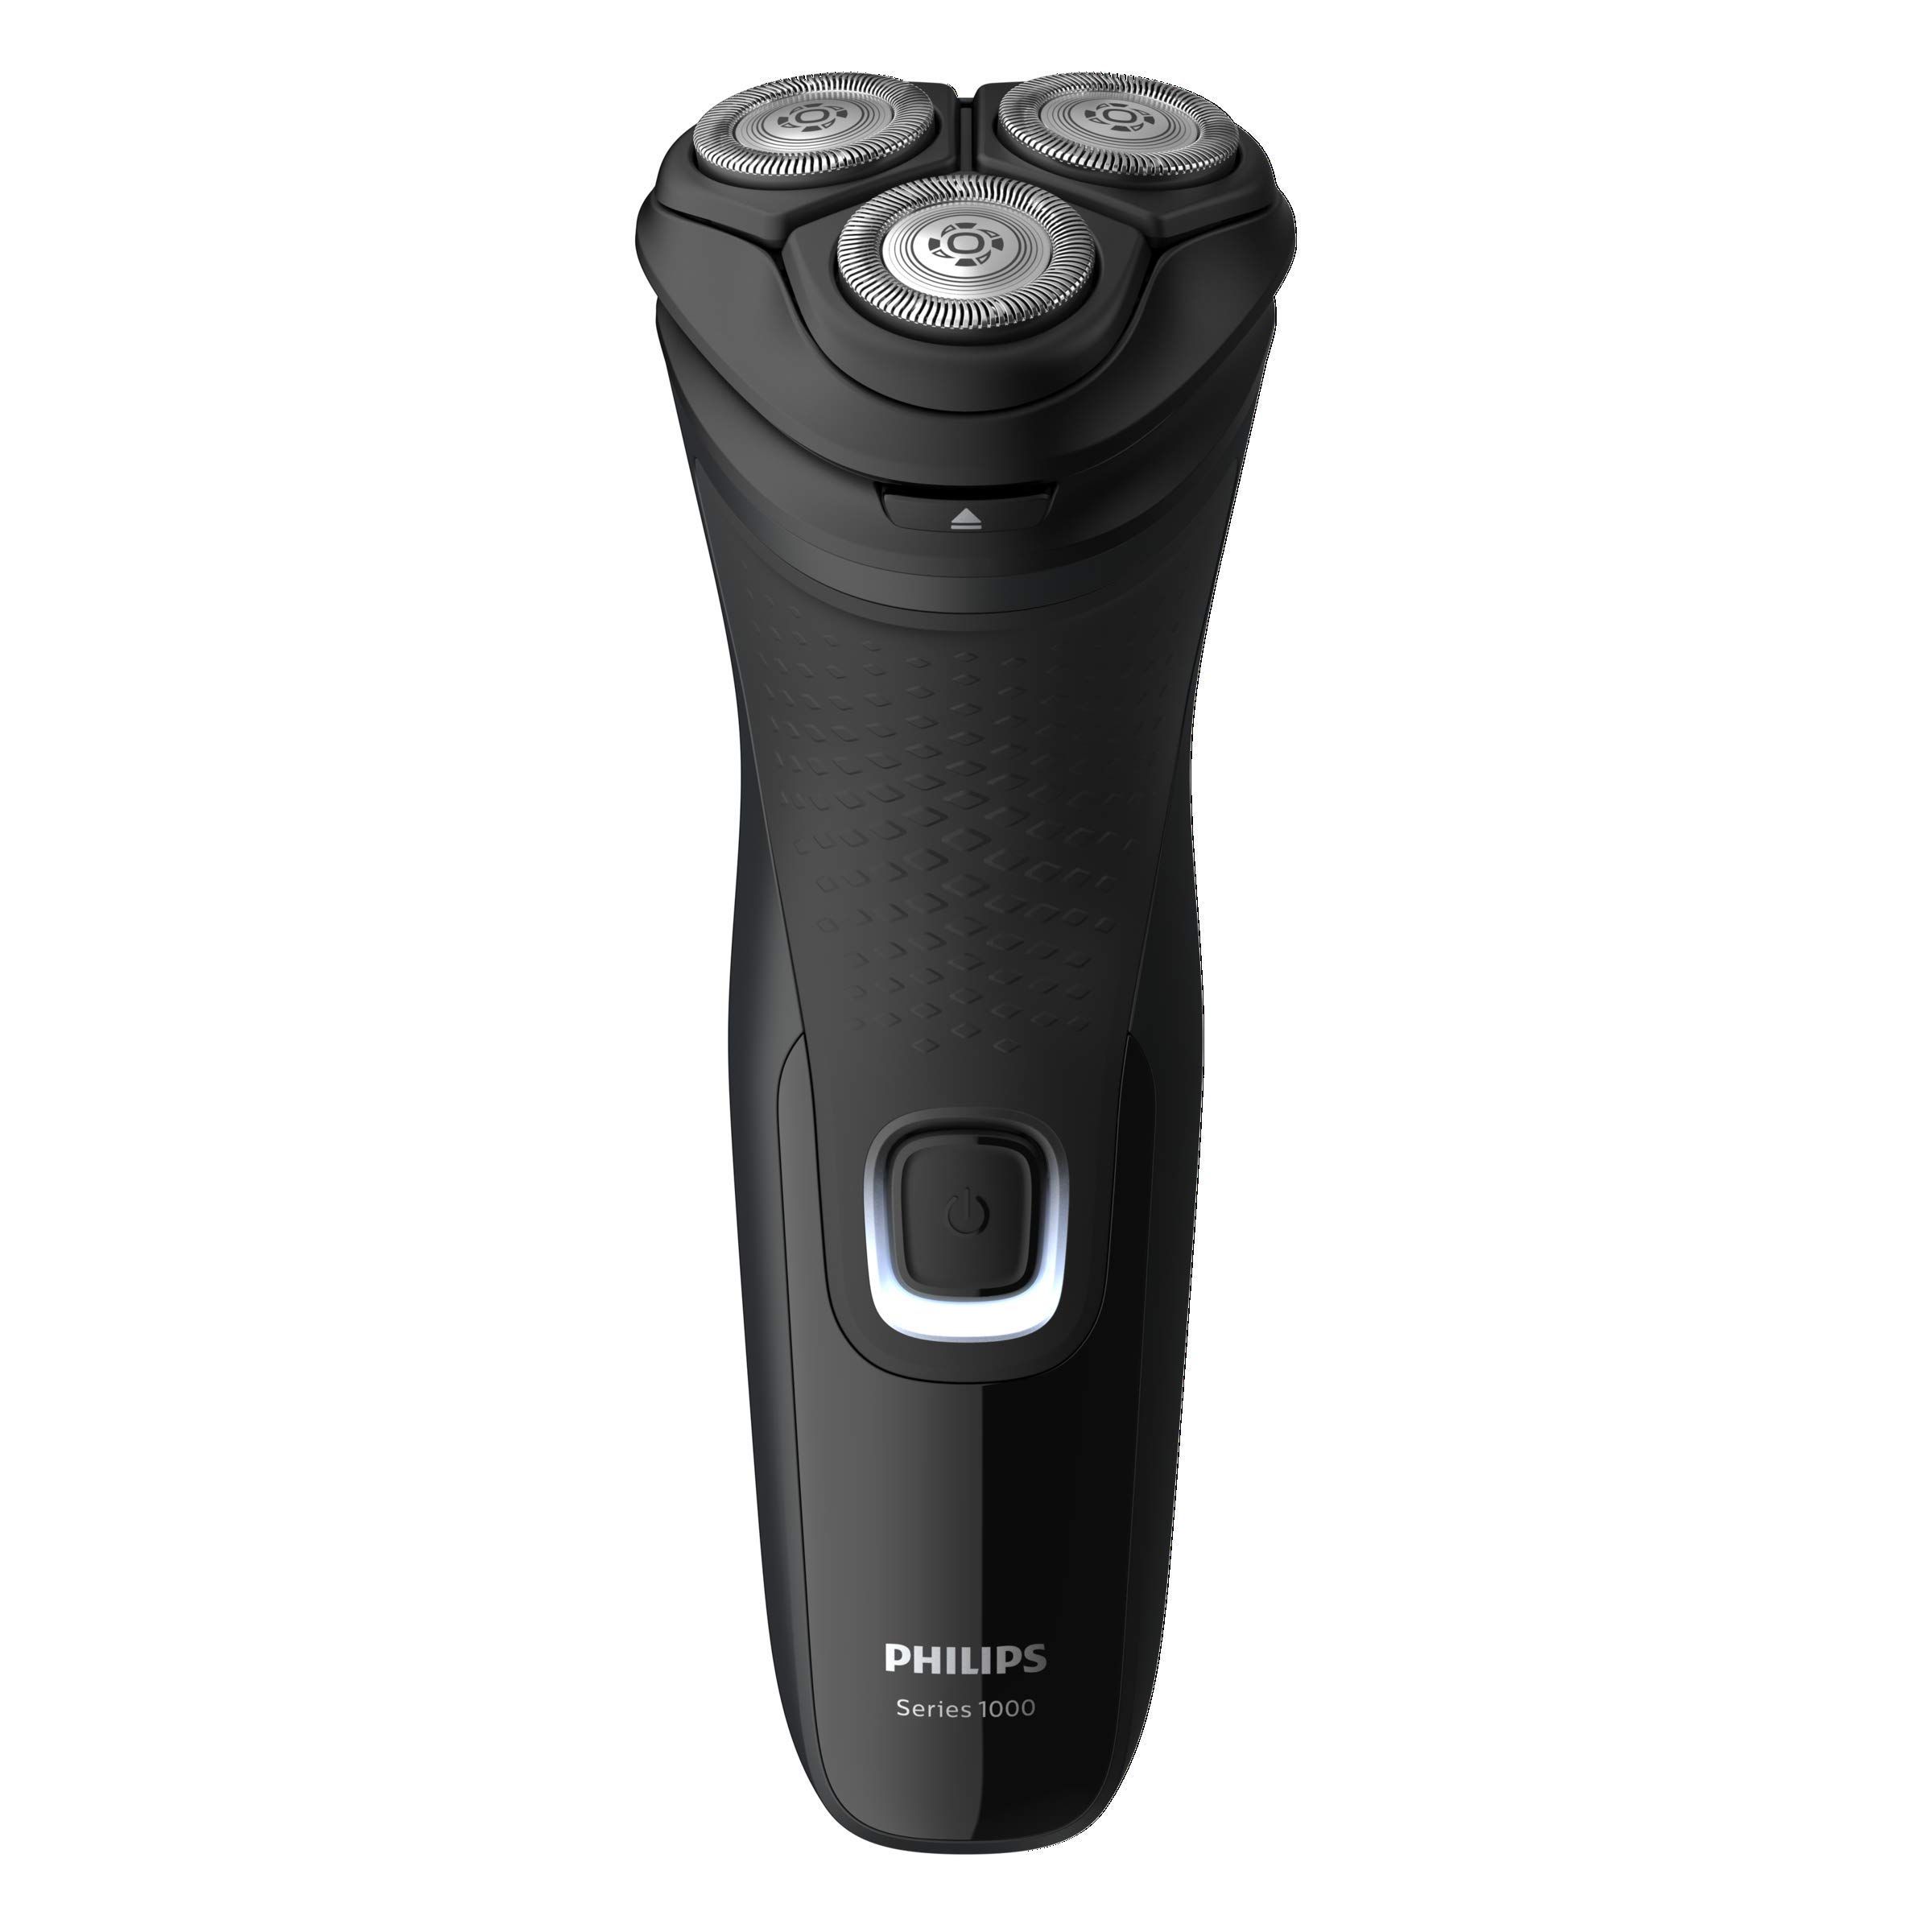 Philips Shaver Series 1000 with Pop-Up Trimmer, Black, S1232/41 | Amazon (CA)